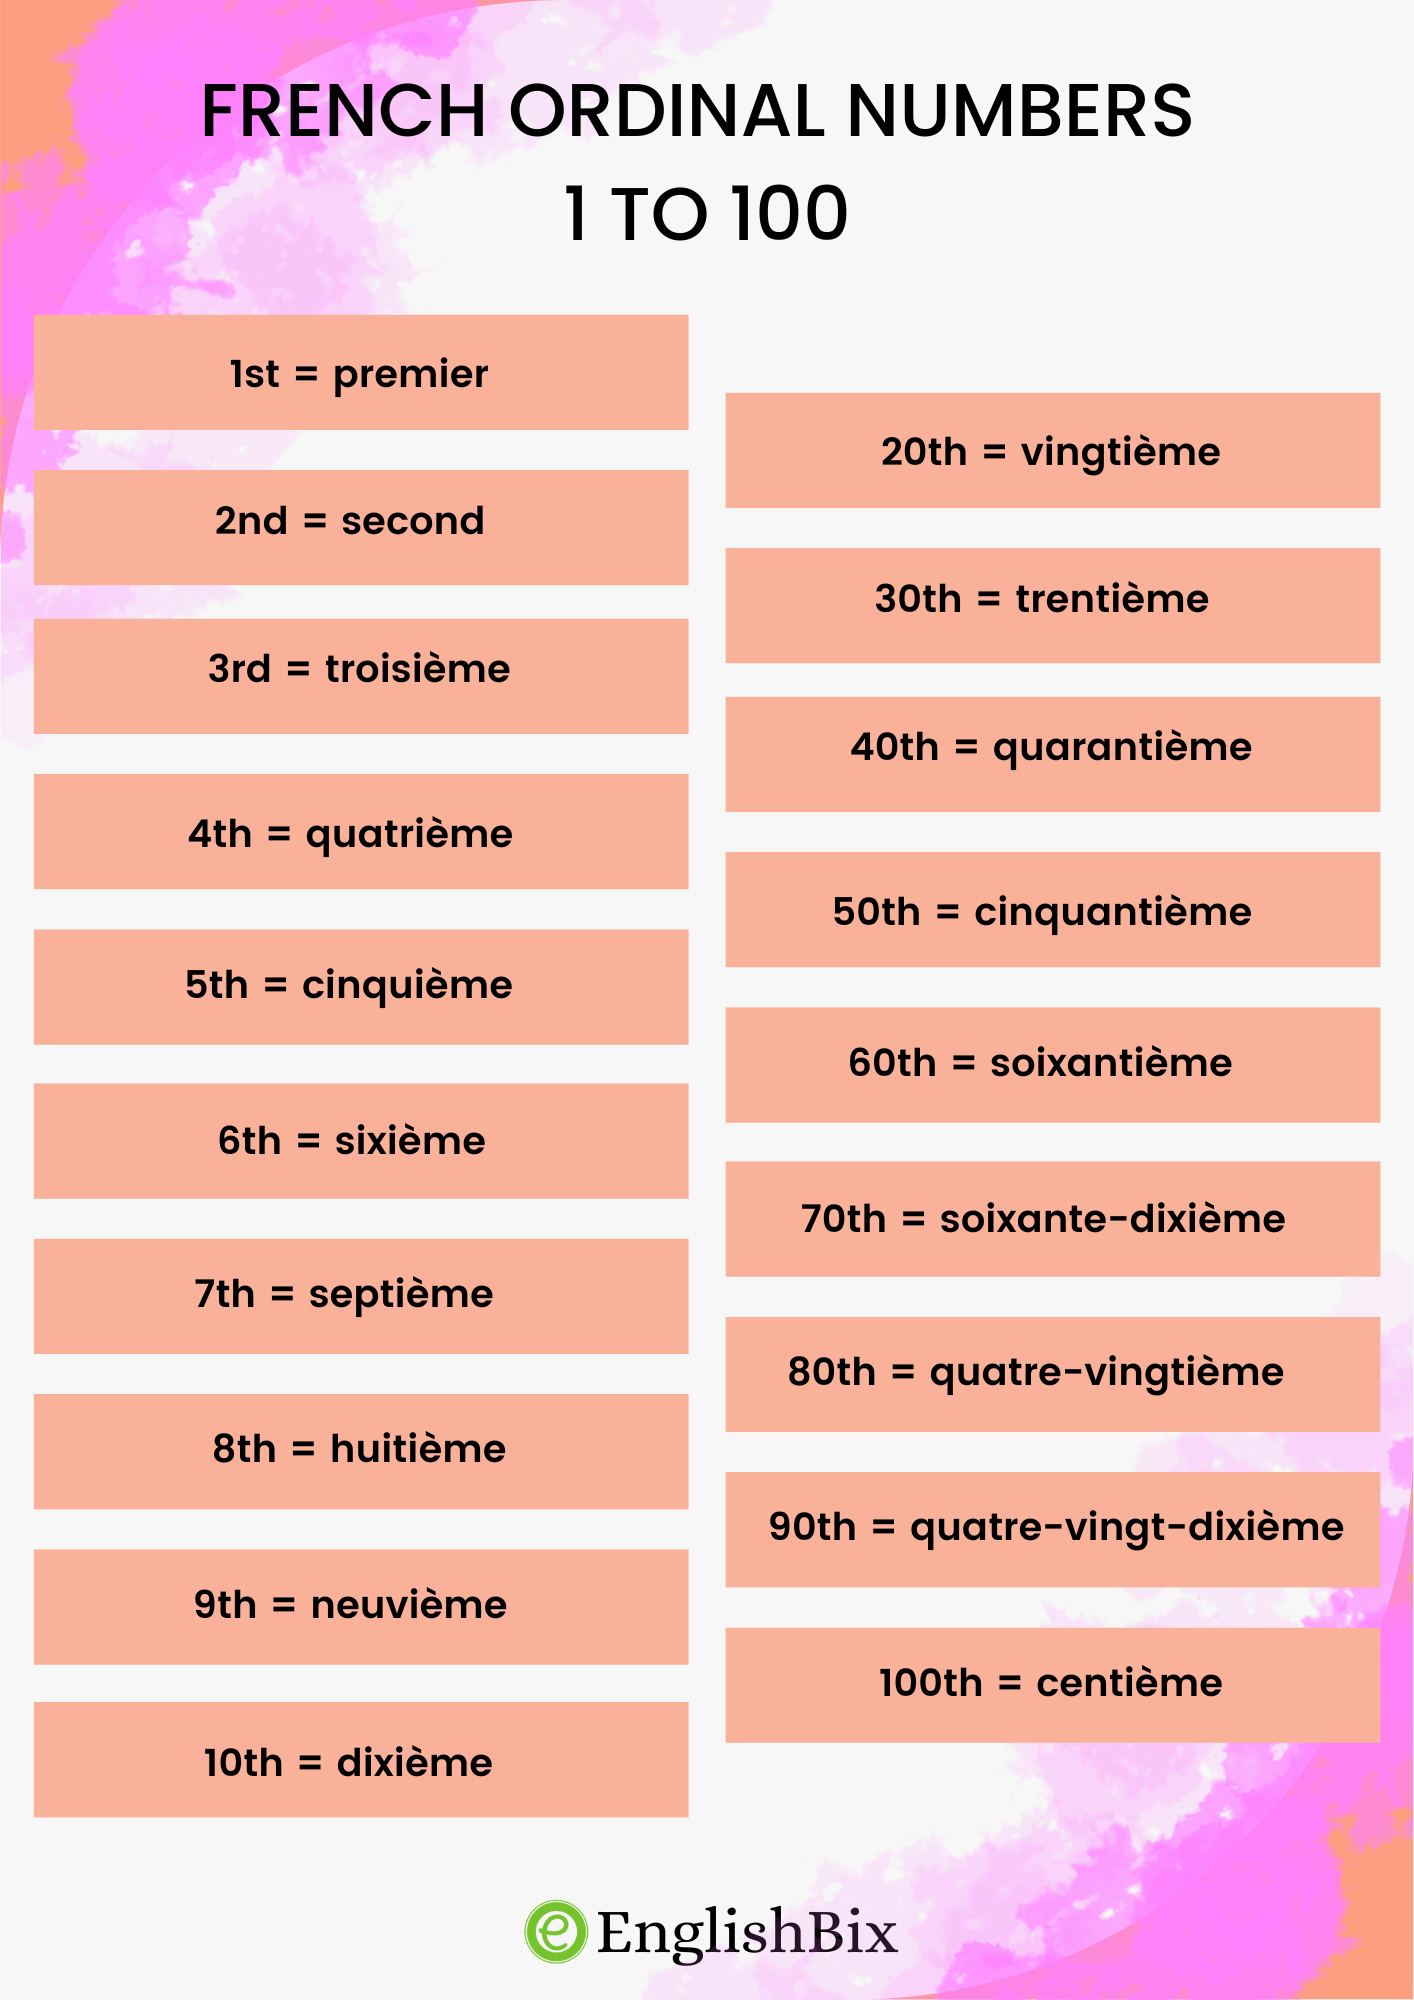 french-ordinal-numbers-from-1-to-100-englishbix